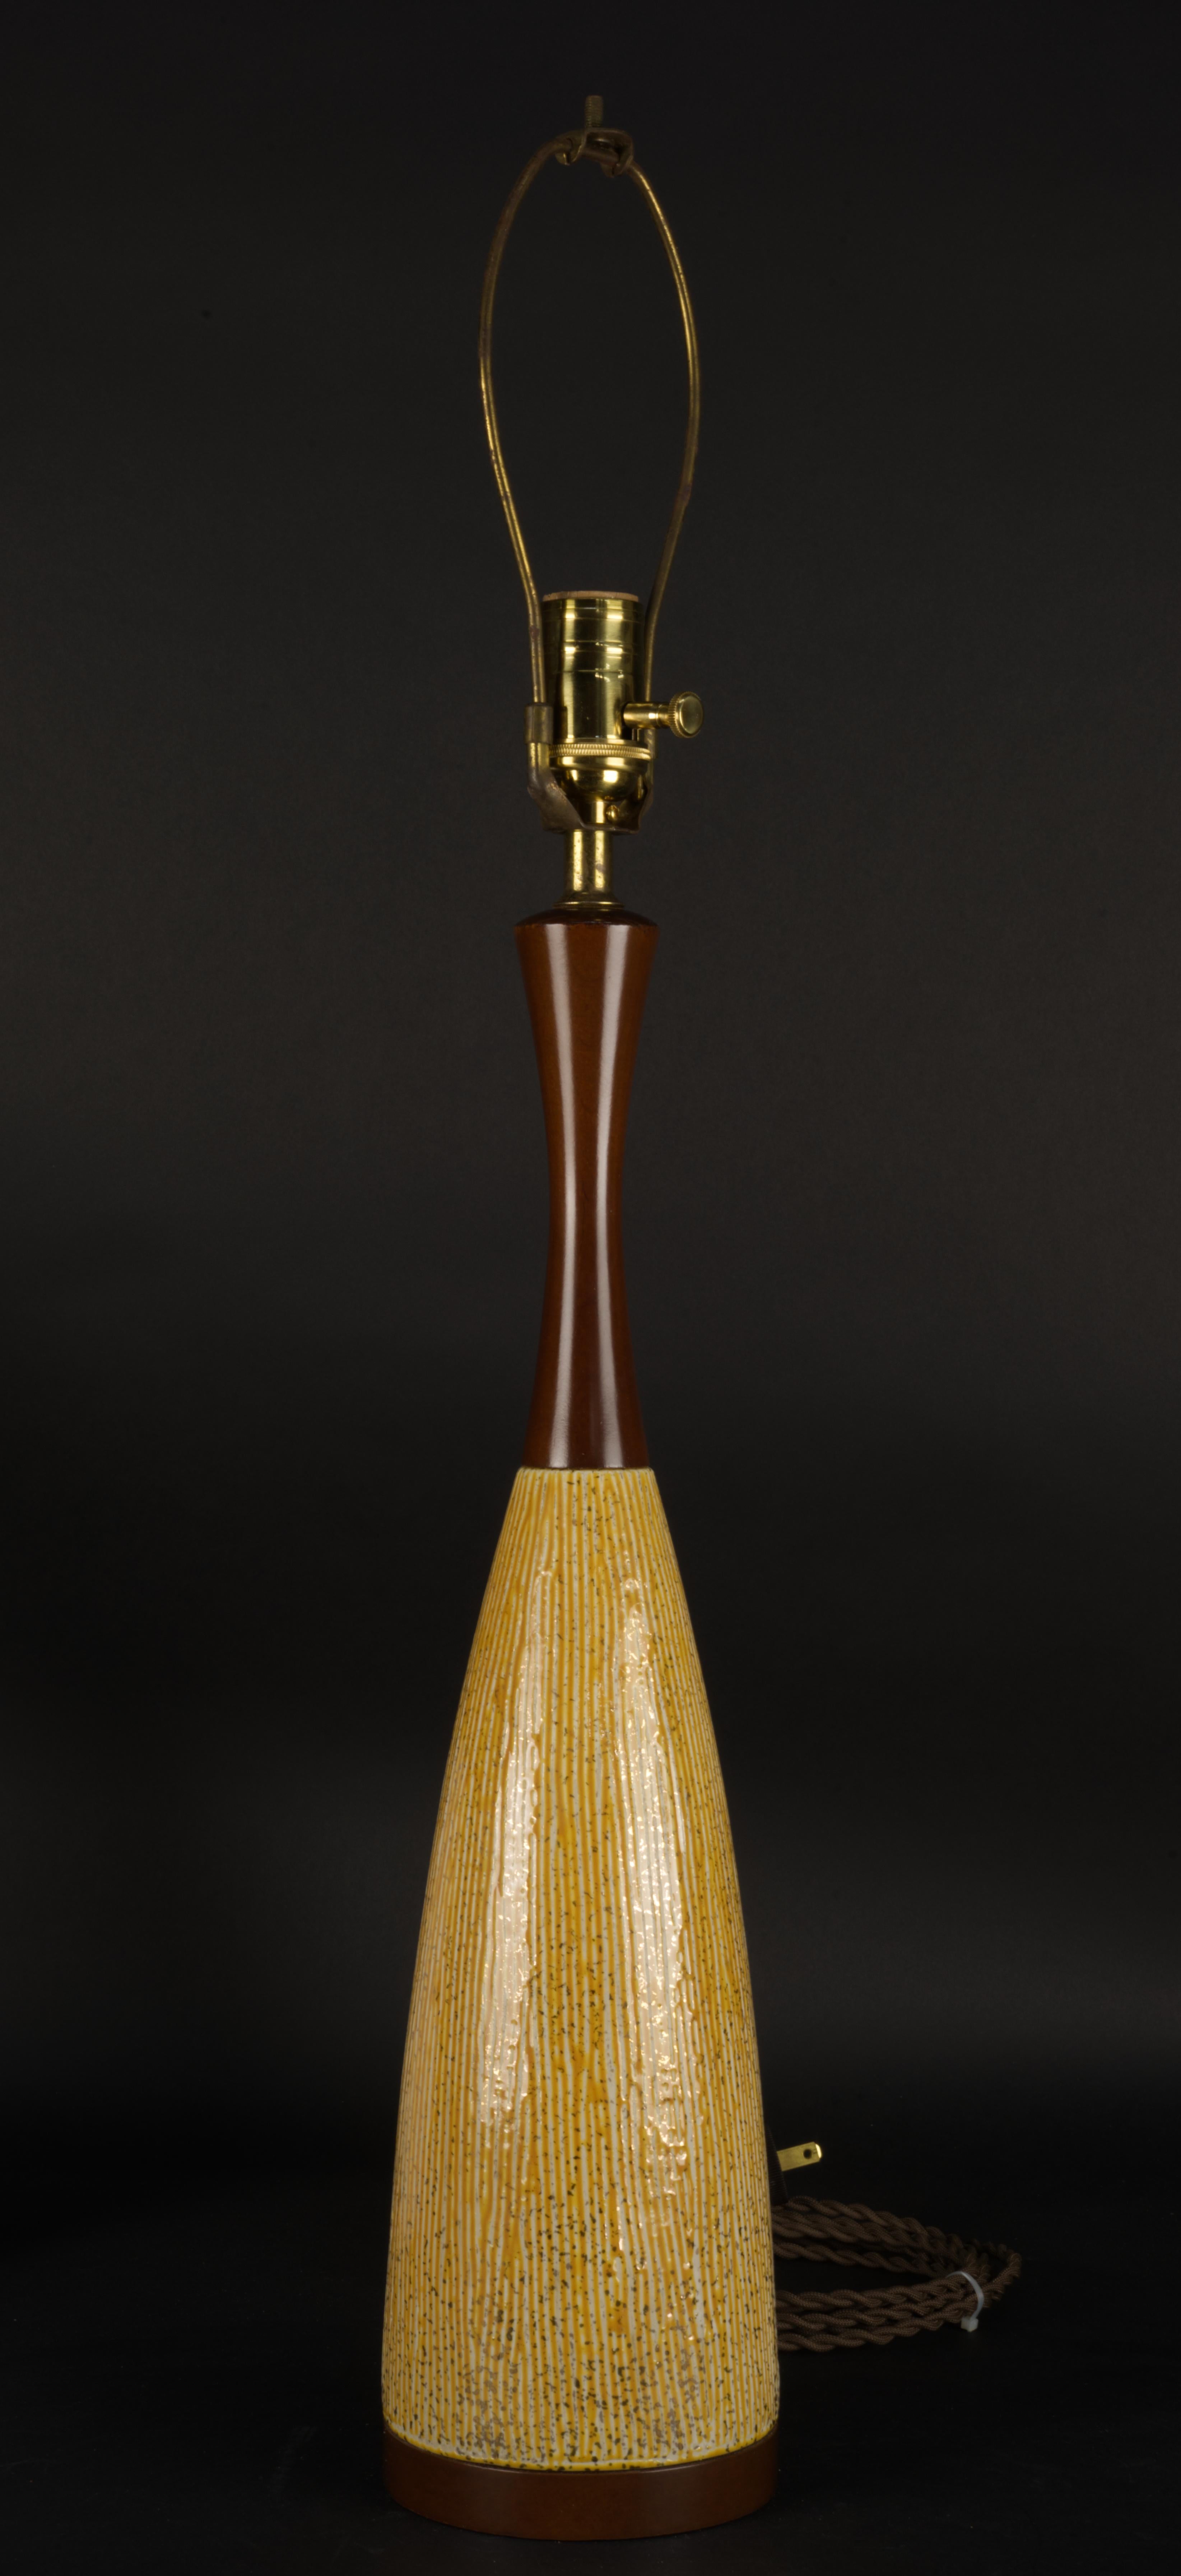  Gorgeous vintage mid-century modern, Scandinavian organic style lamp with sgraffito design of vertical stripes on a warm yellow glaze and small gold flakes throughout the body has lacquered beech wood base and neck.  Rich chocolate tones of the